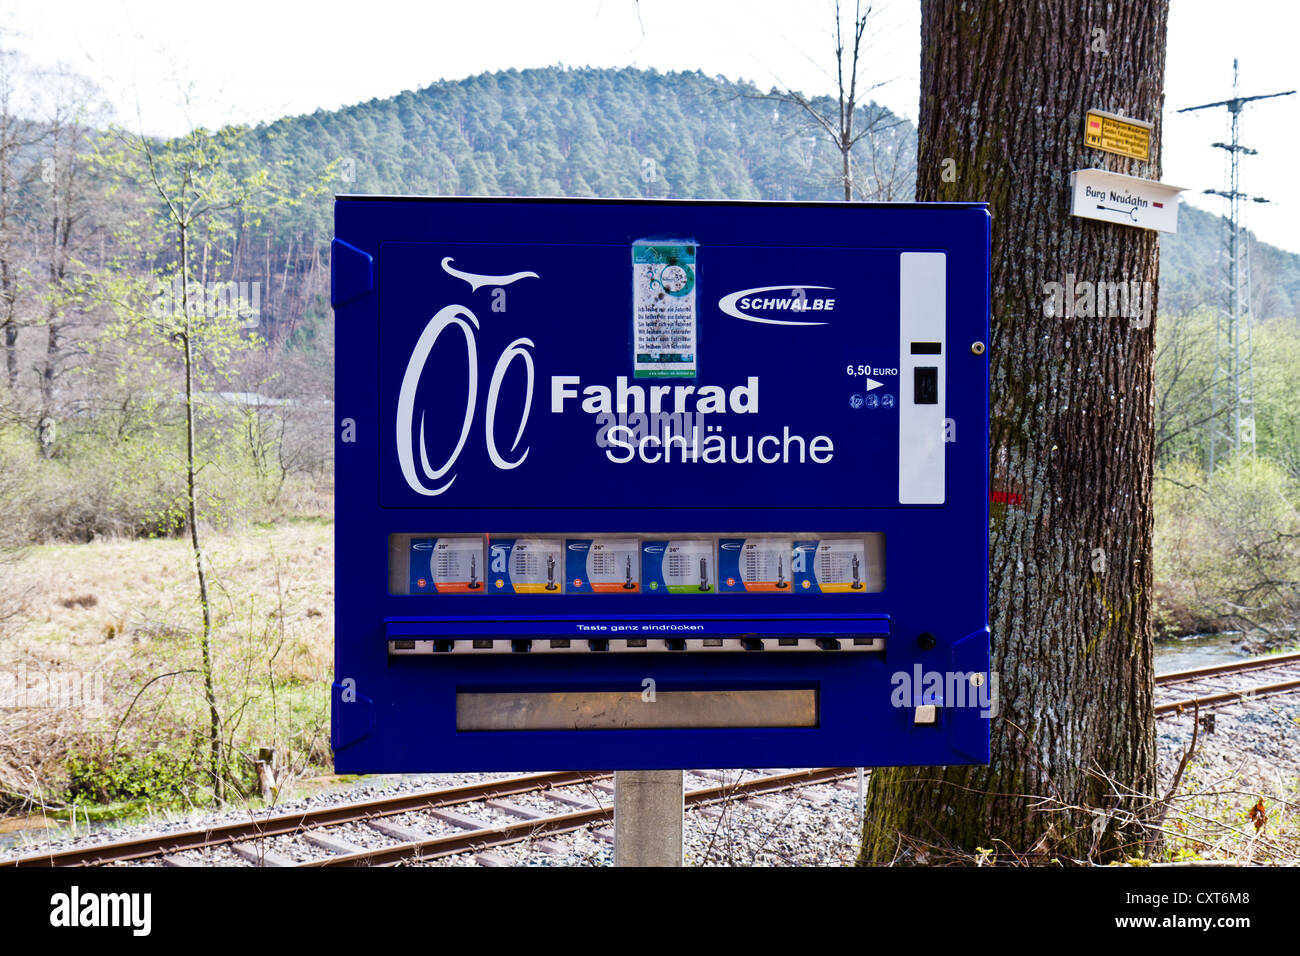 Vending machine for inner tubes for bicycle wheels, near Dahn, Palatinate Forest, Rhineland-Palatinate, Germany, Europe Stock Photo